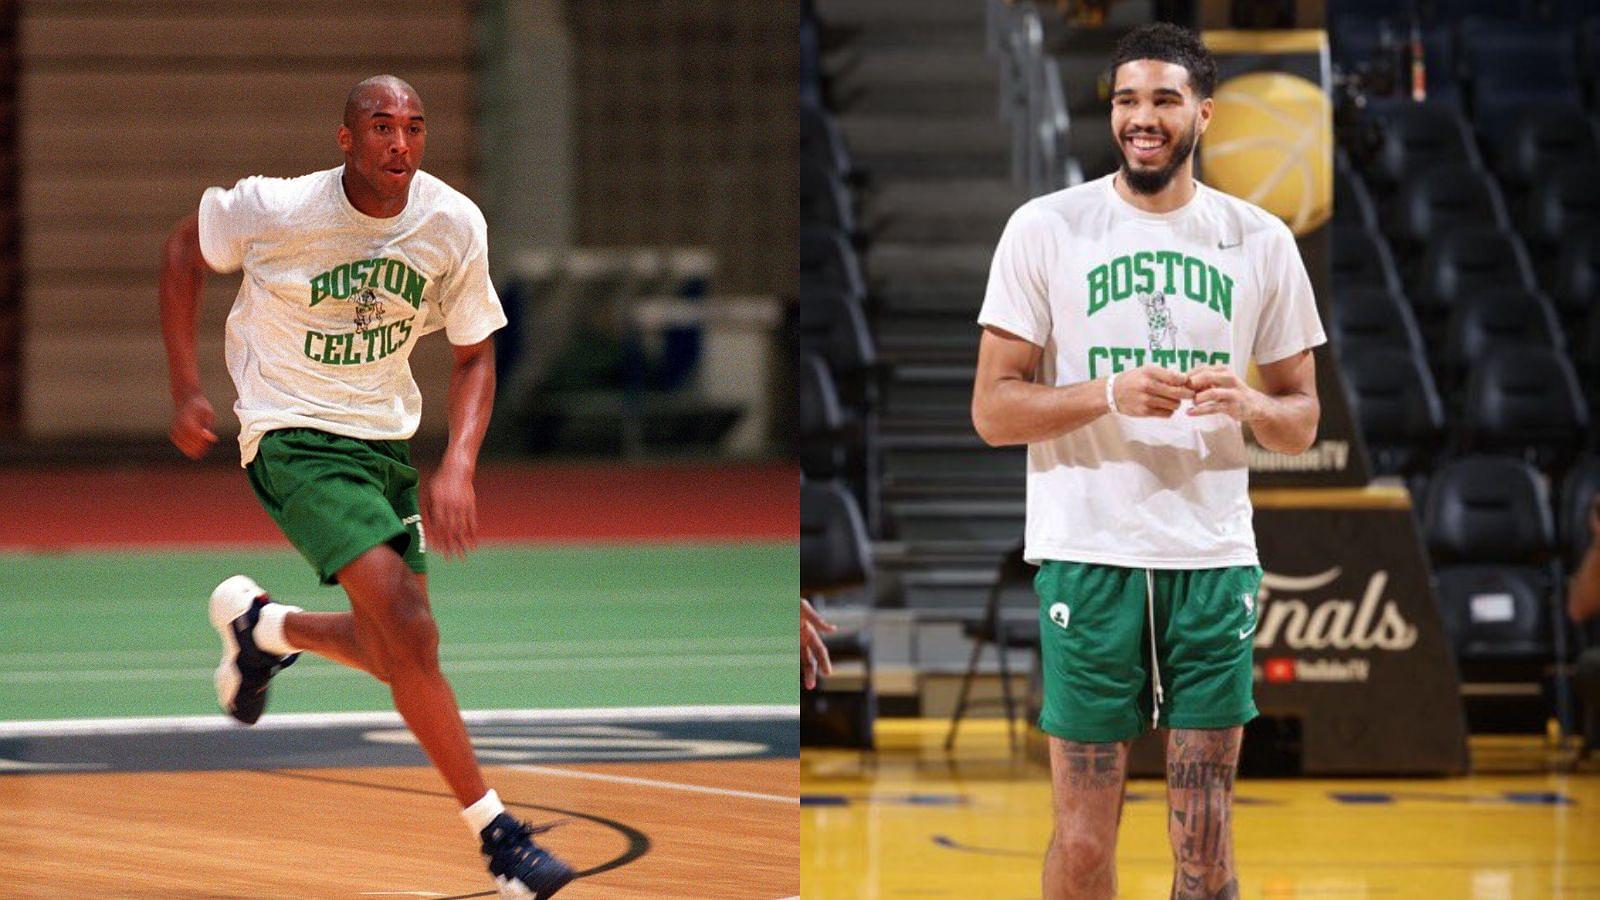 “Crazy to think Kobe Bryant could have been a Celtic and Jayson Tatum a Laker”: Fans wonder what could have been as JT comes out in Kobe’s pre-draft Celtics jersey